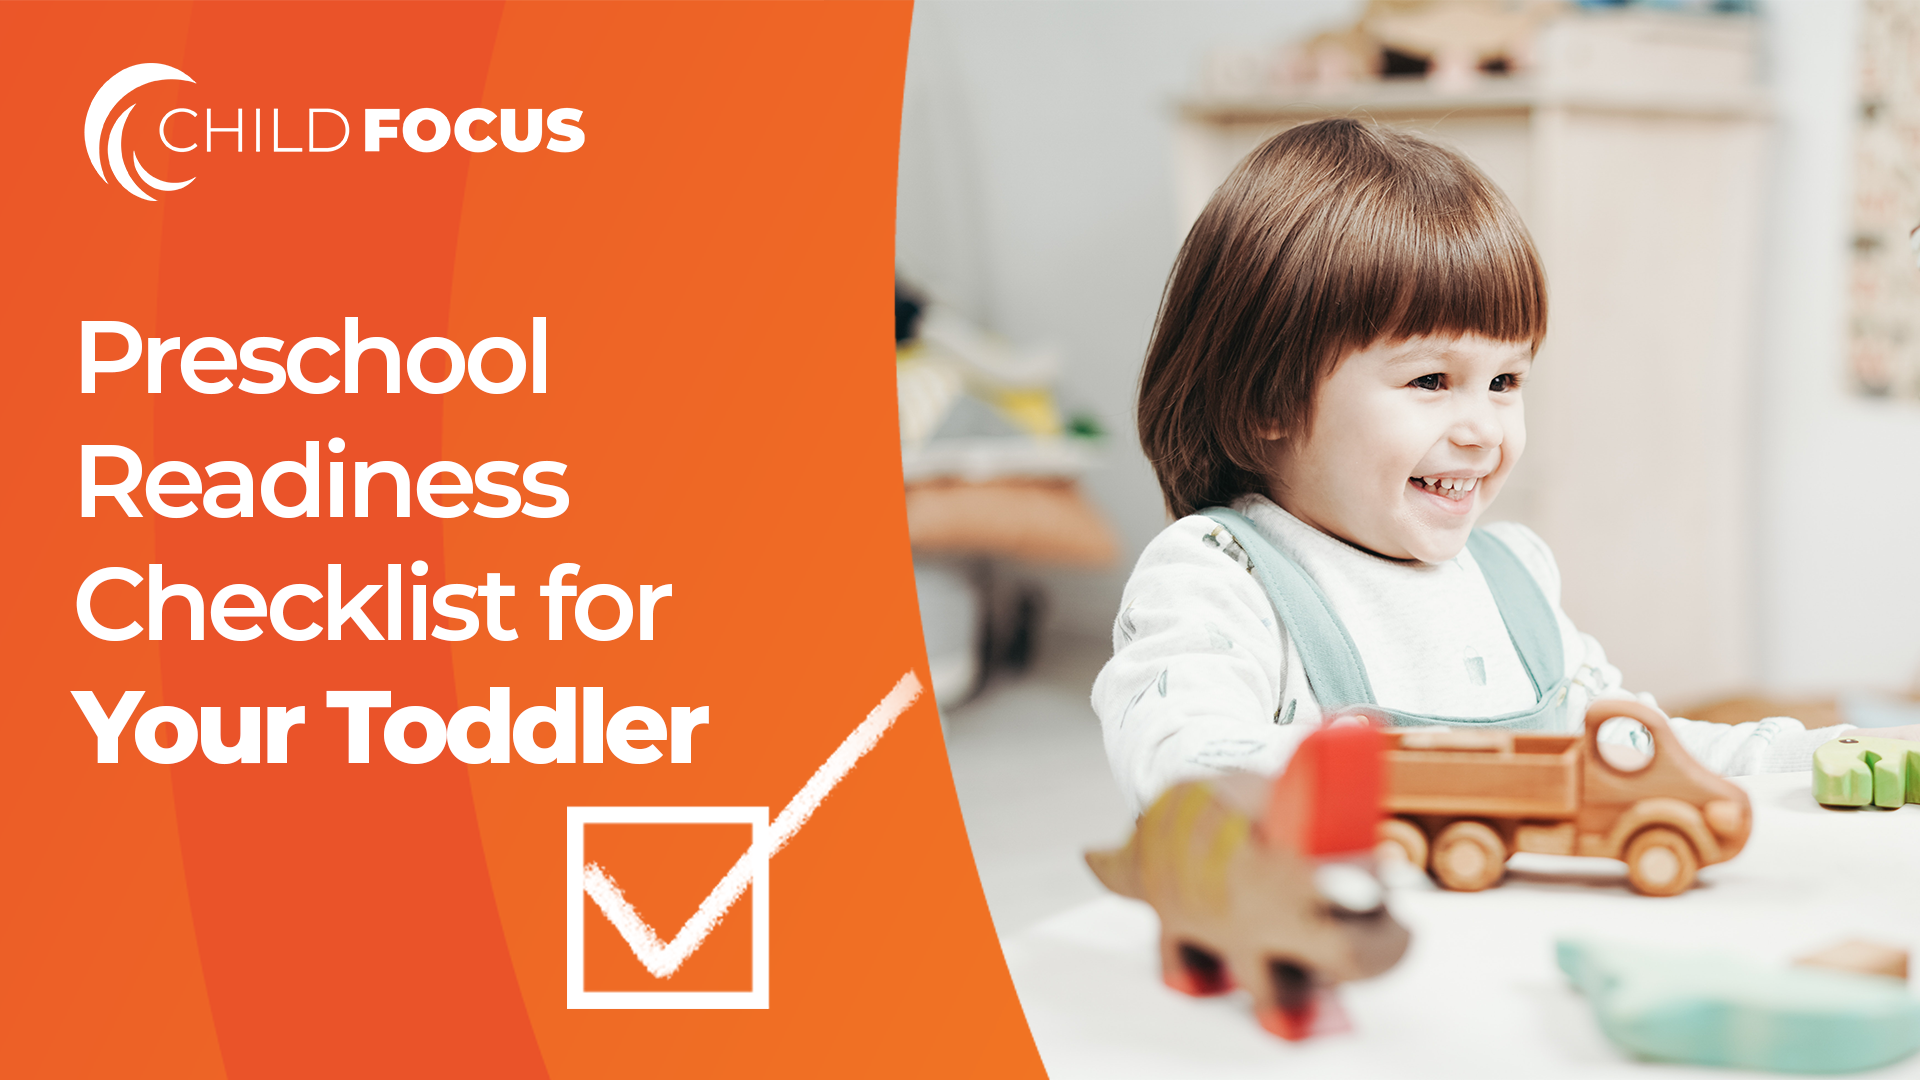 A little kid playing with toys and smiling. The text reads " Preschool Readiness Checklist for Your Toddler"